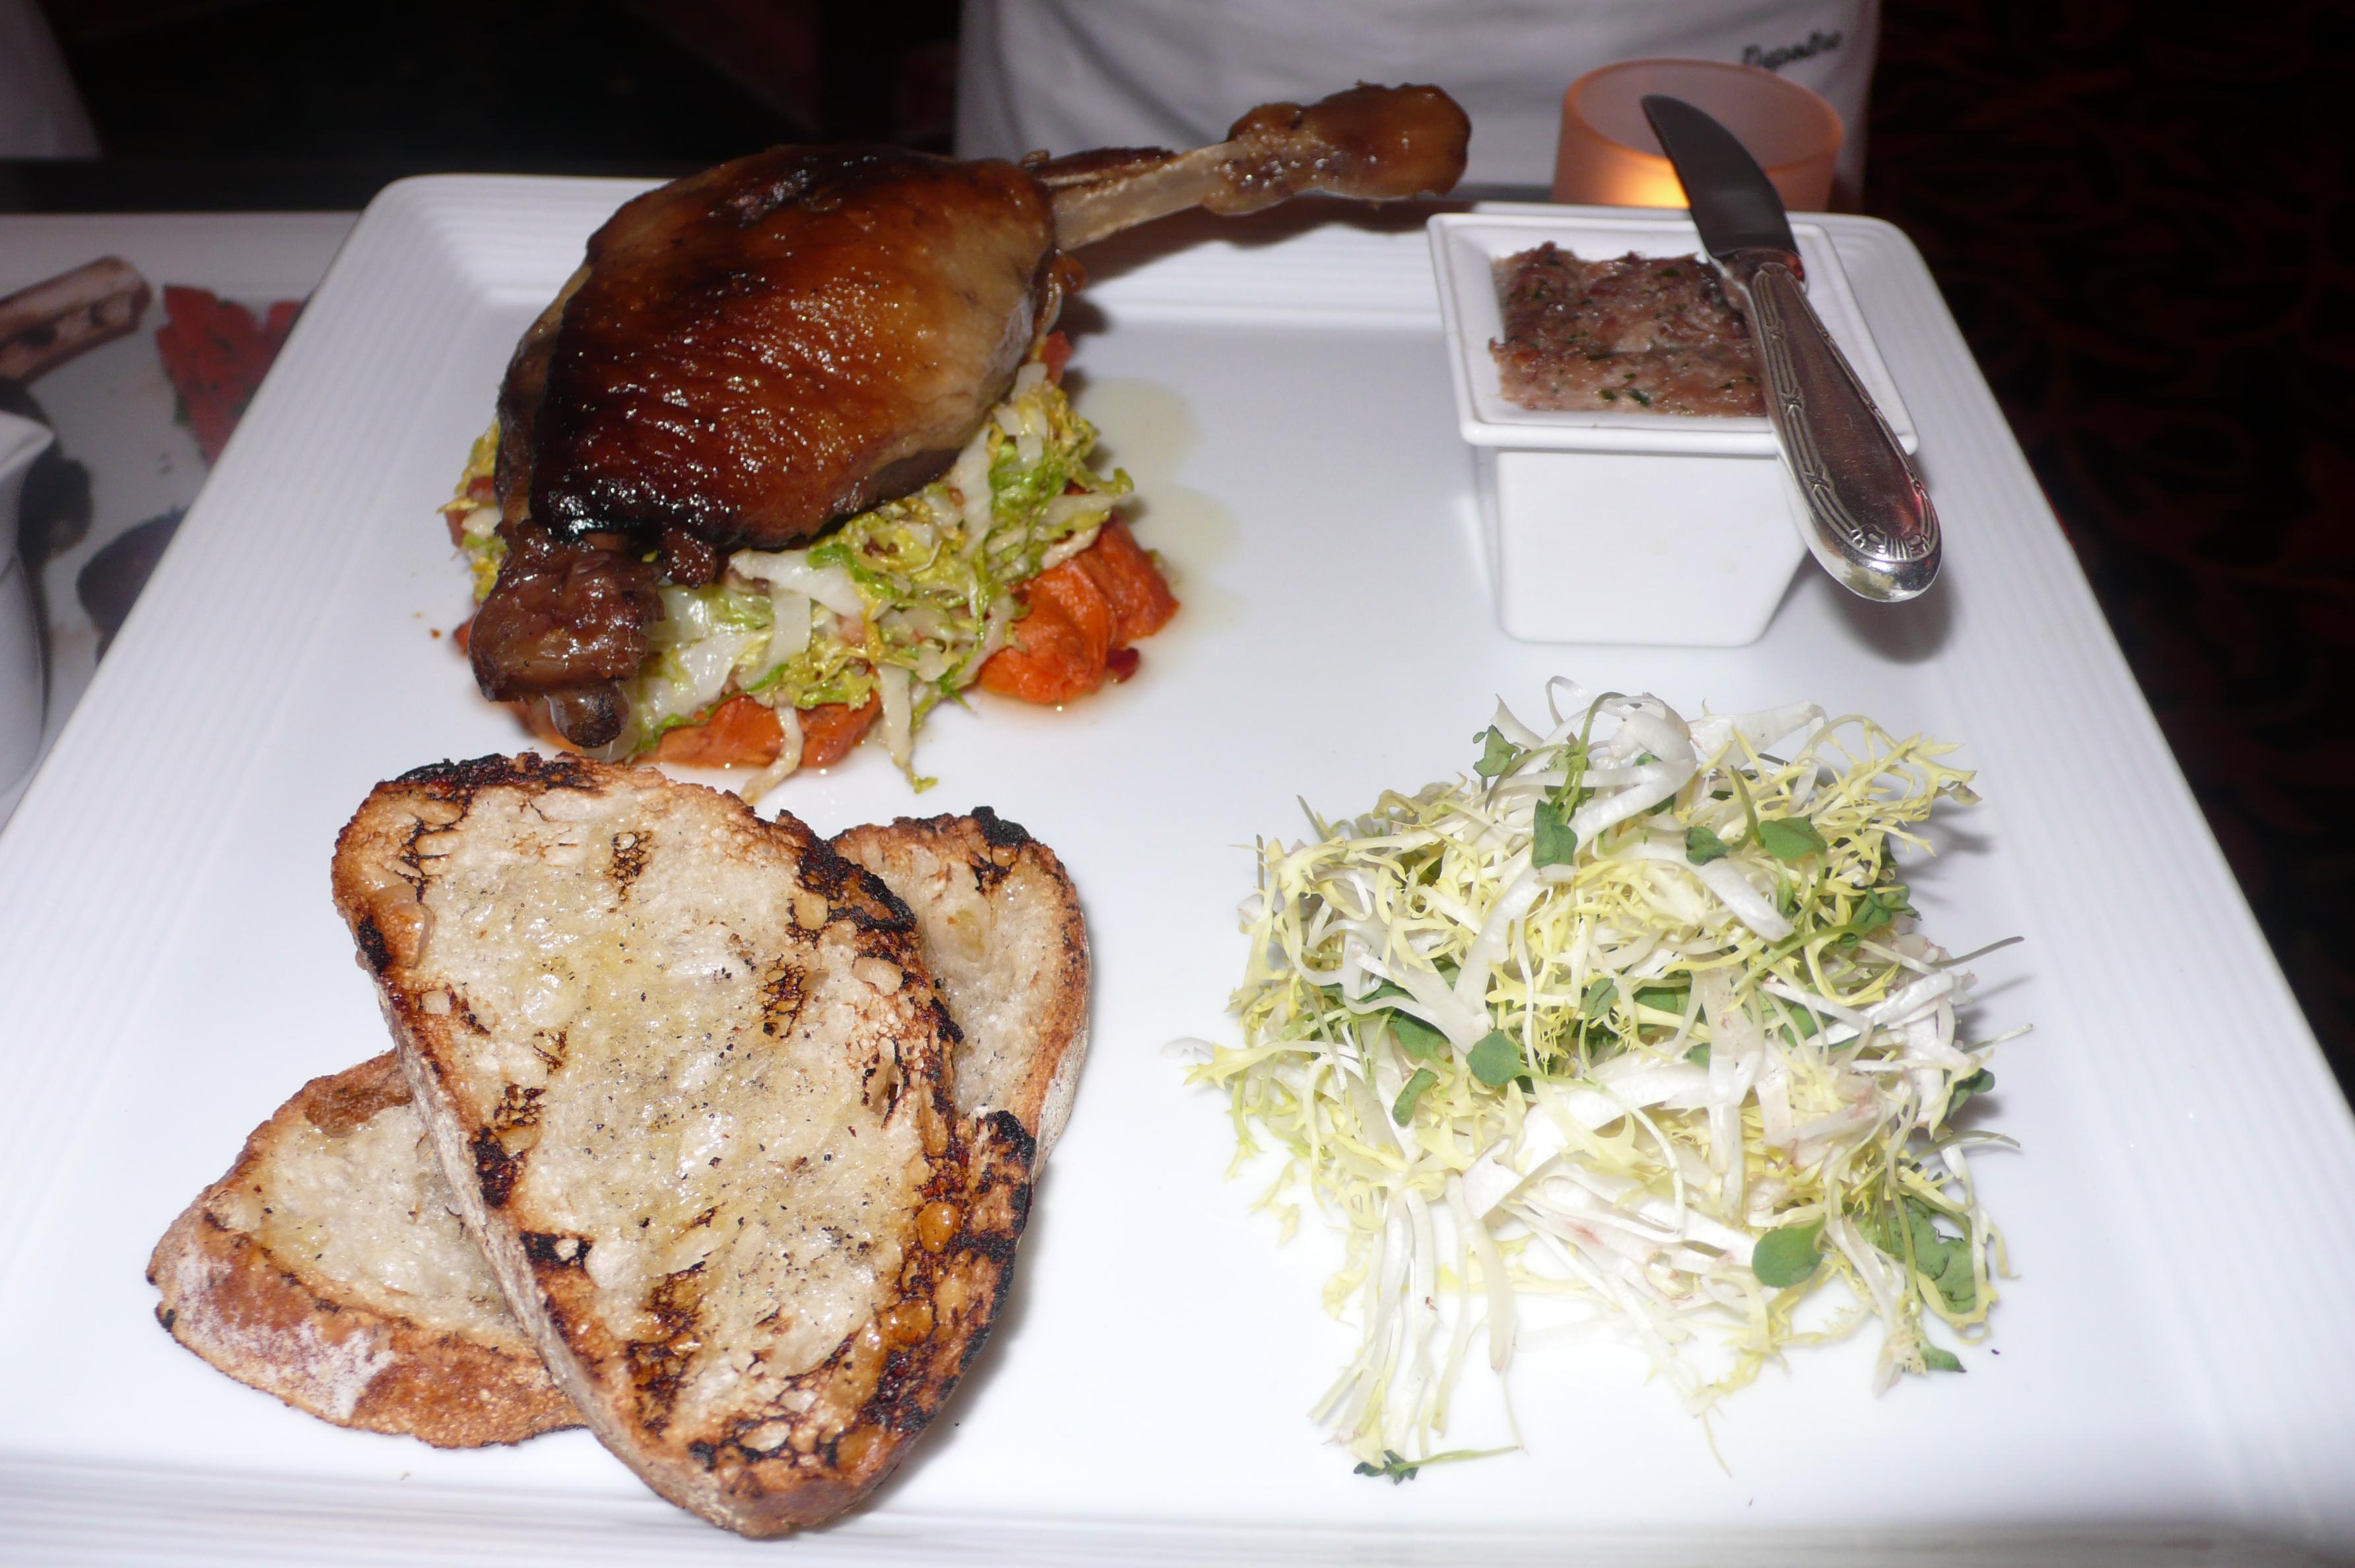 Roasted duck confit with sweet yams, sauteed cabbage and duck rillette